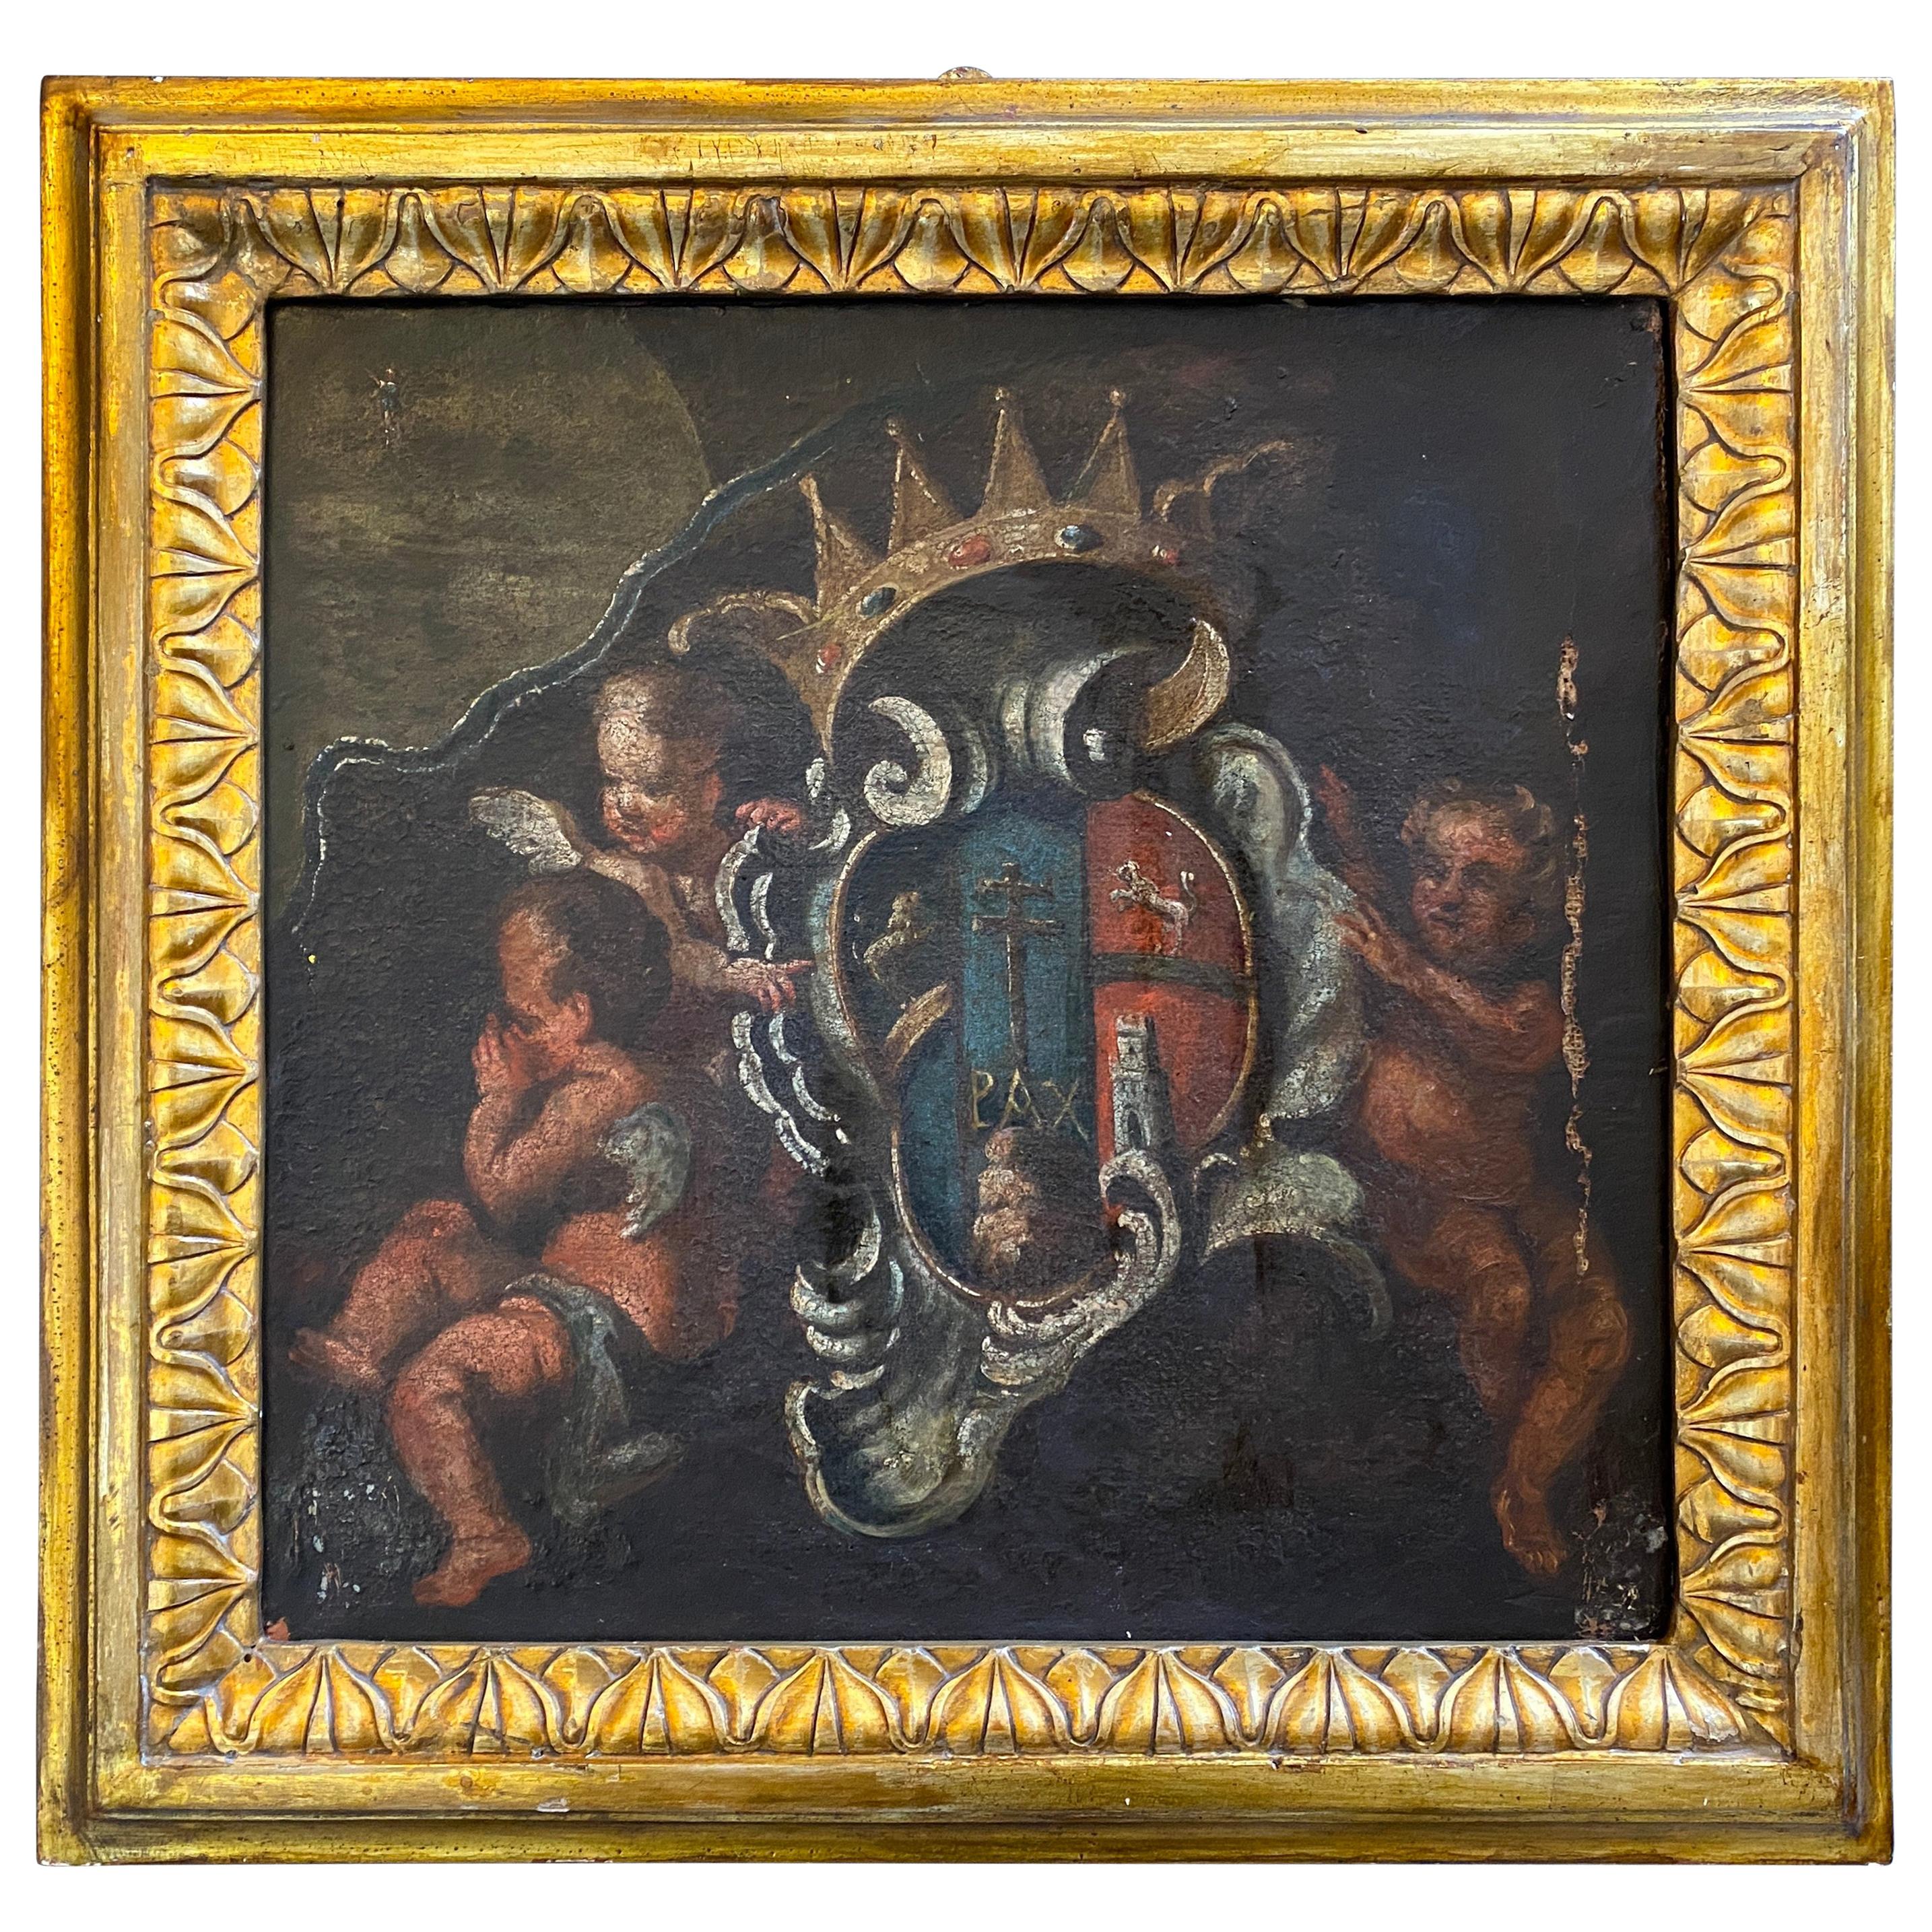 17th Century Italian Painting Fragment of Angels with a Noble Coat of Arms